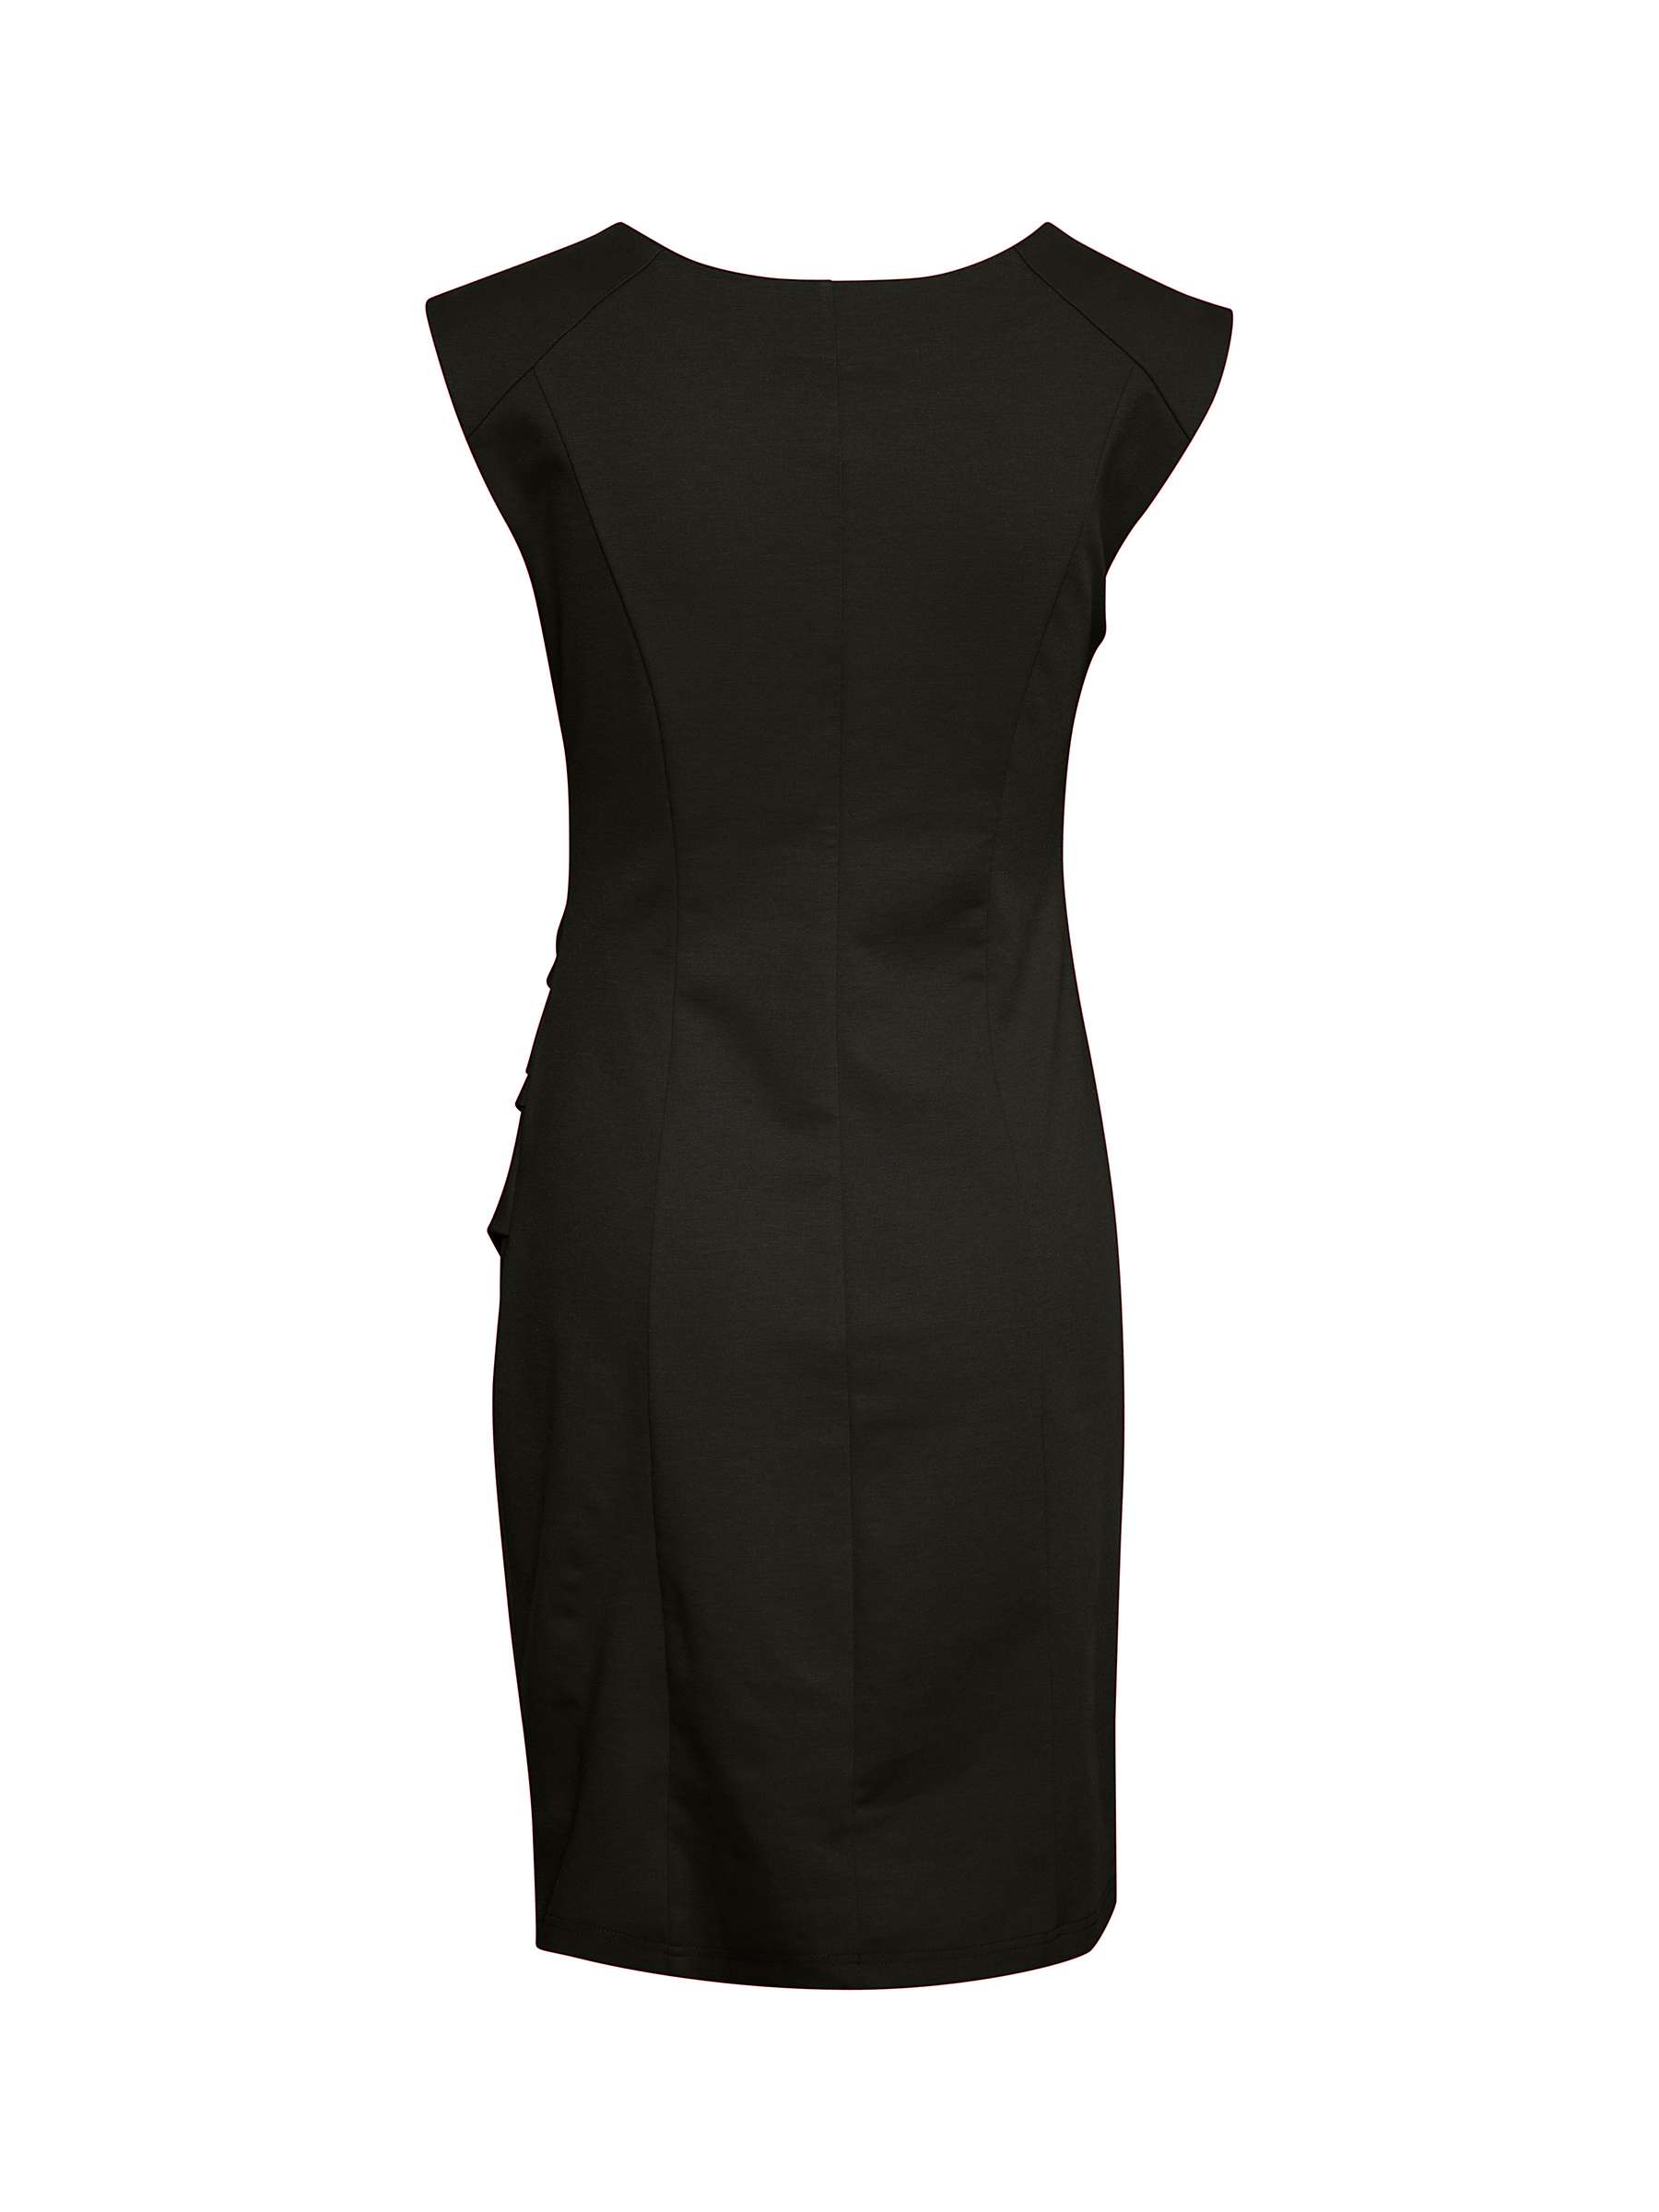 Buy KAFFE India Sleeveless Fitted Cocktail Dress, Black Deep Online at johnlewis.com